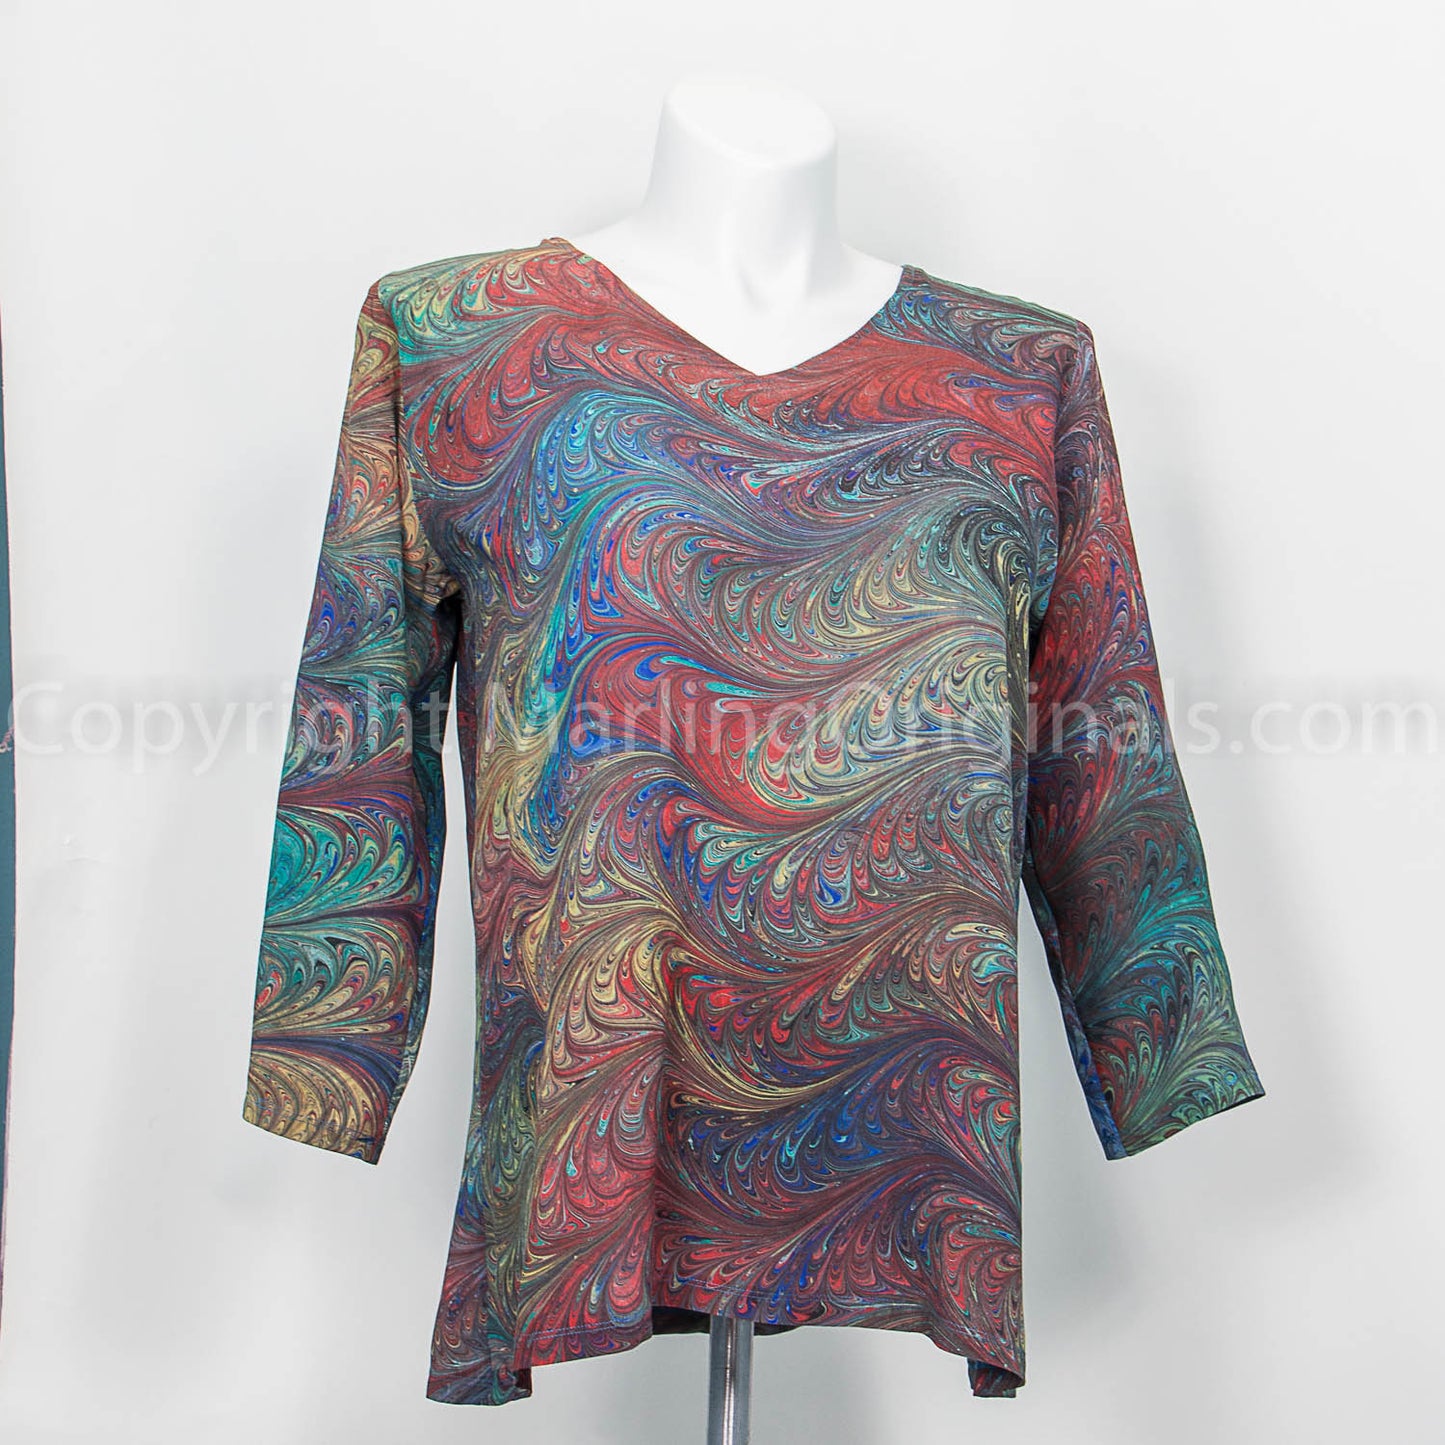 marbled silk v neck top in a feathered pattern with deep red and teal